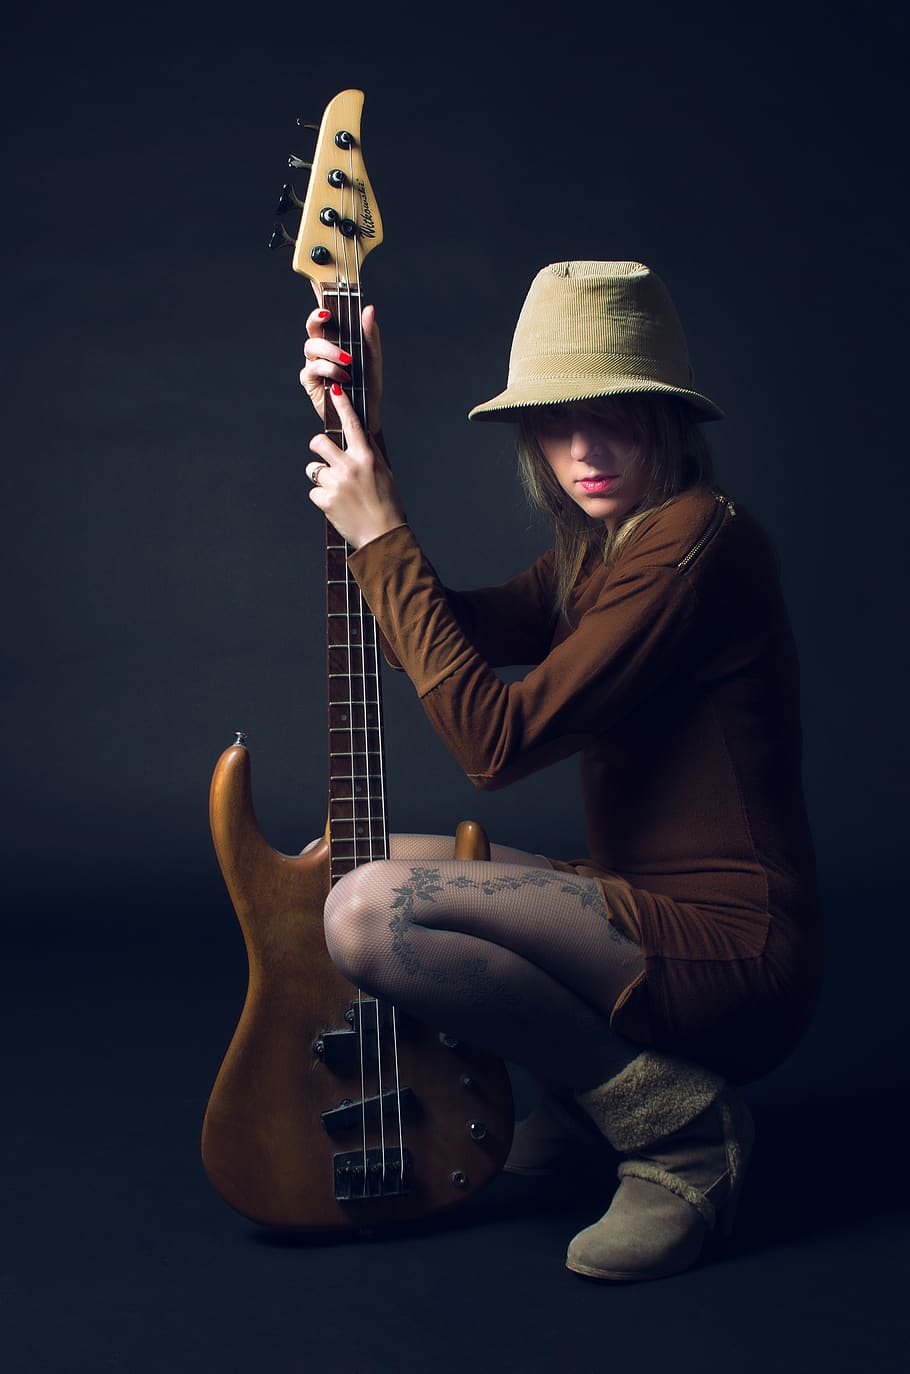 model, studio, girl, guitar, hat, woman, graphy, adult, female, one person